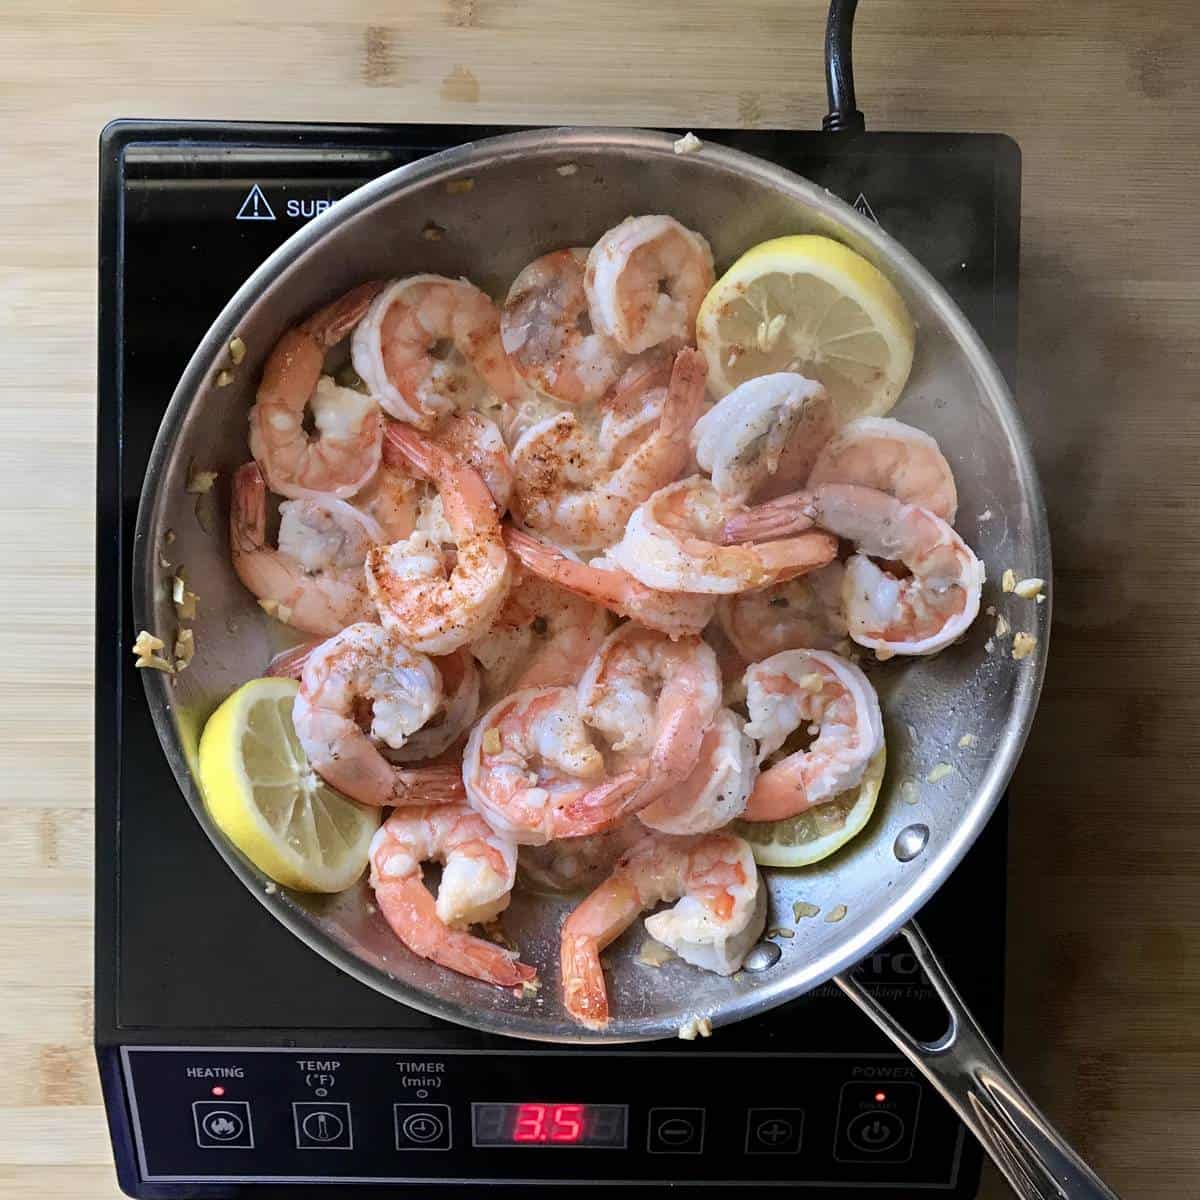 Shrimp being sauteed in a pan.